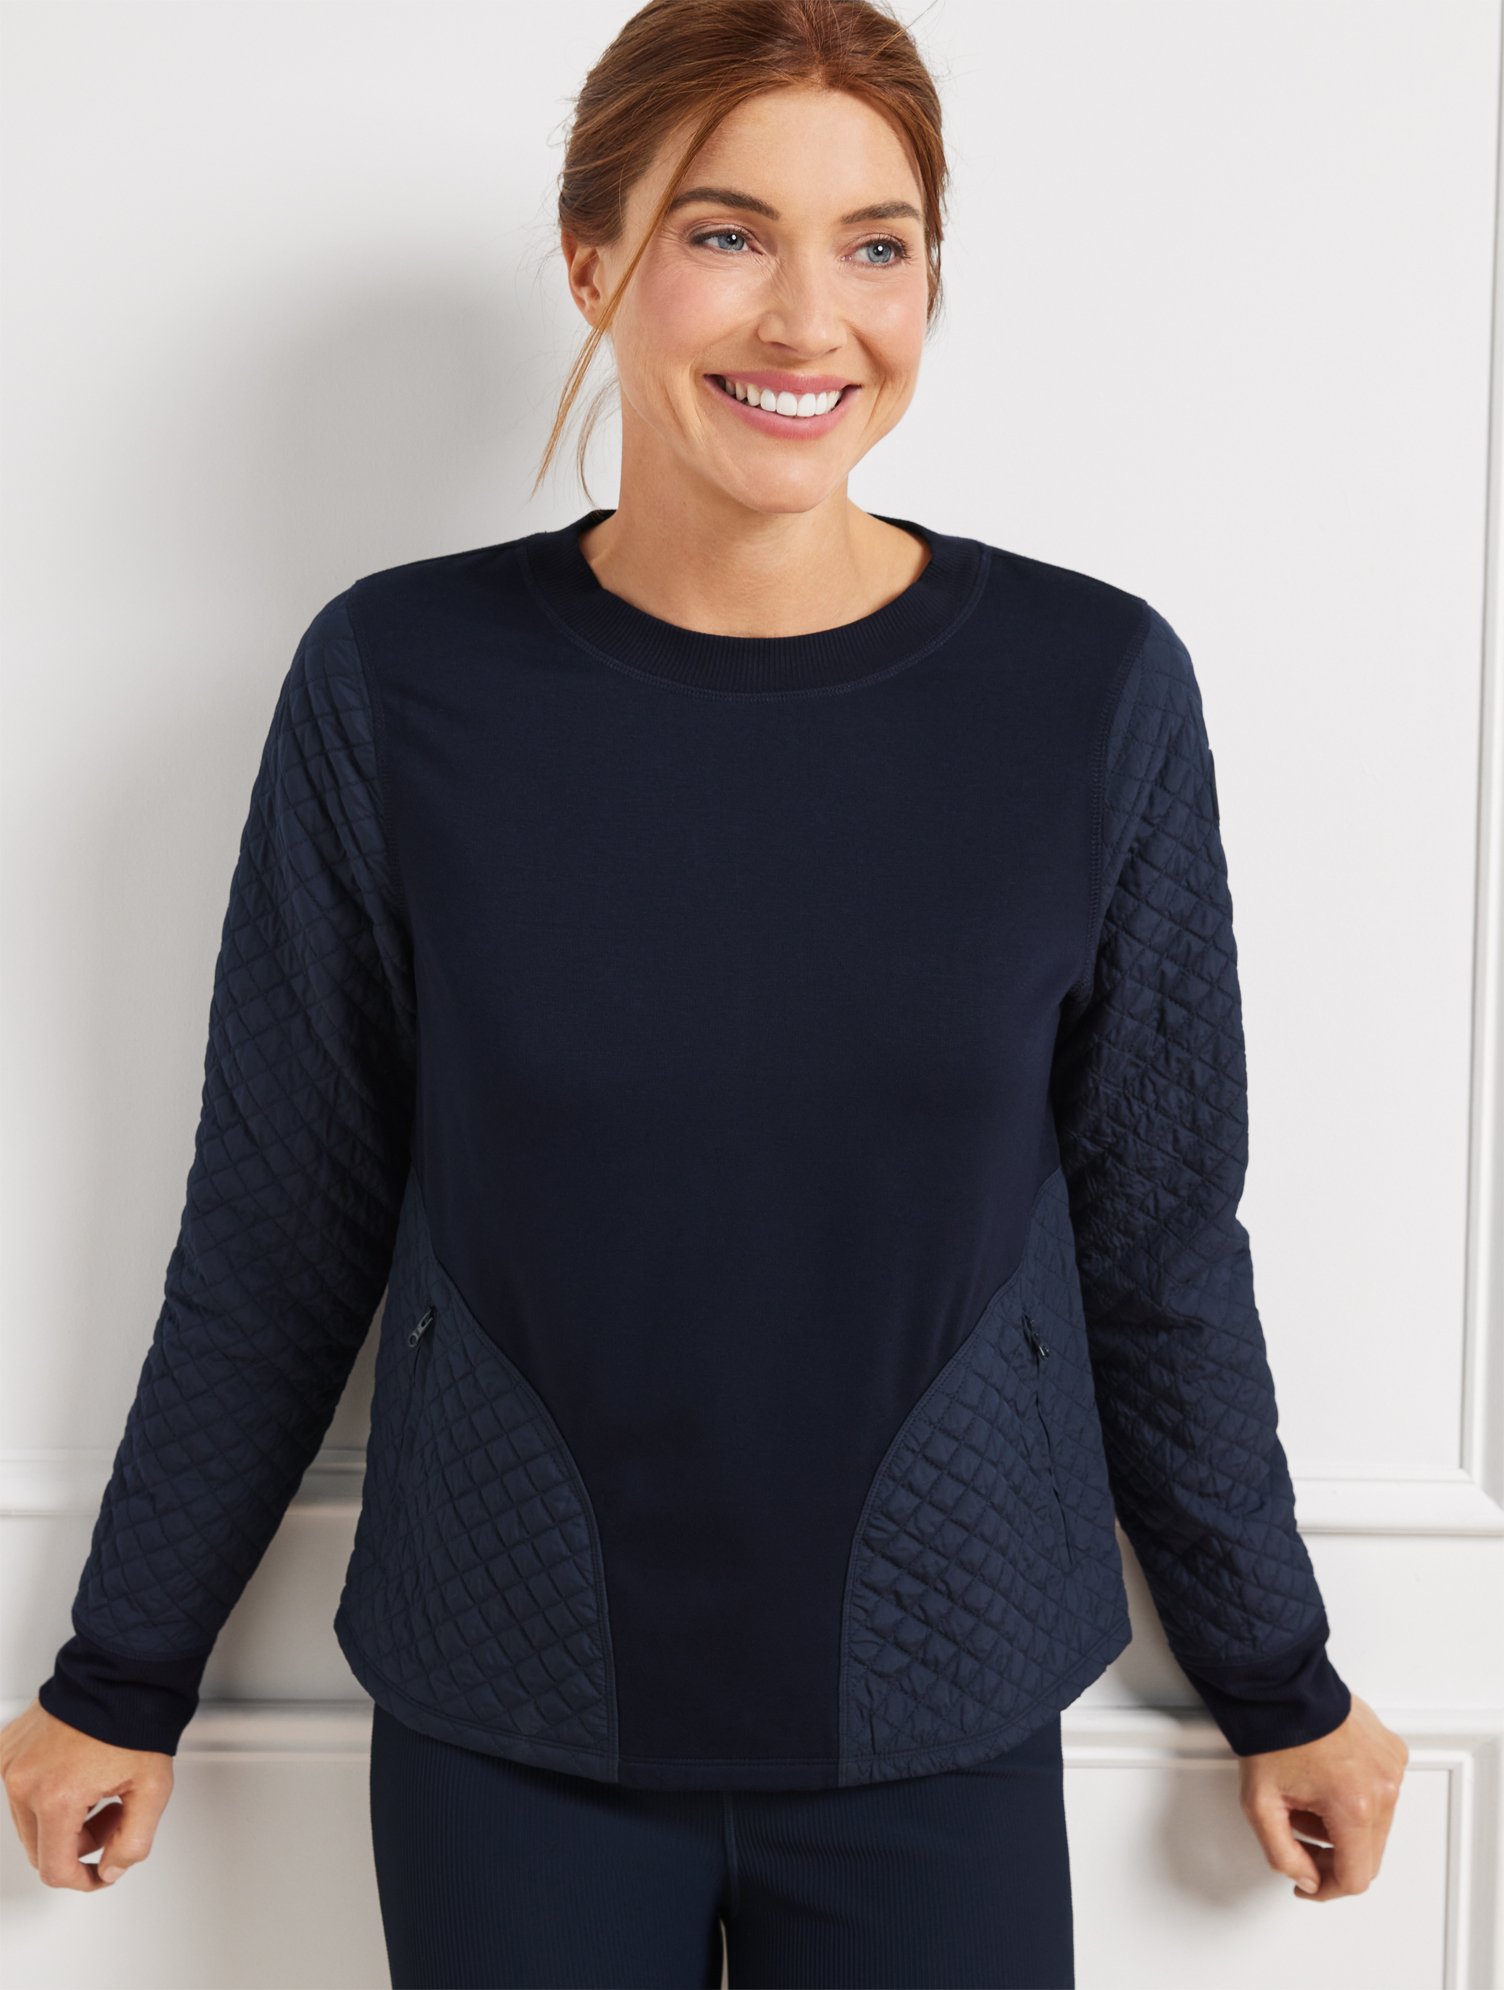 Talbots Quilted Crewneck Sweater Pullover - Blue - 3x